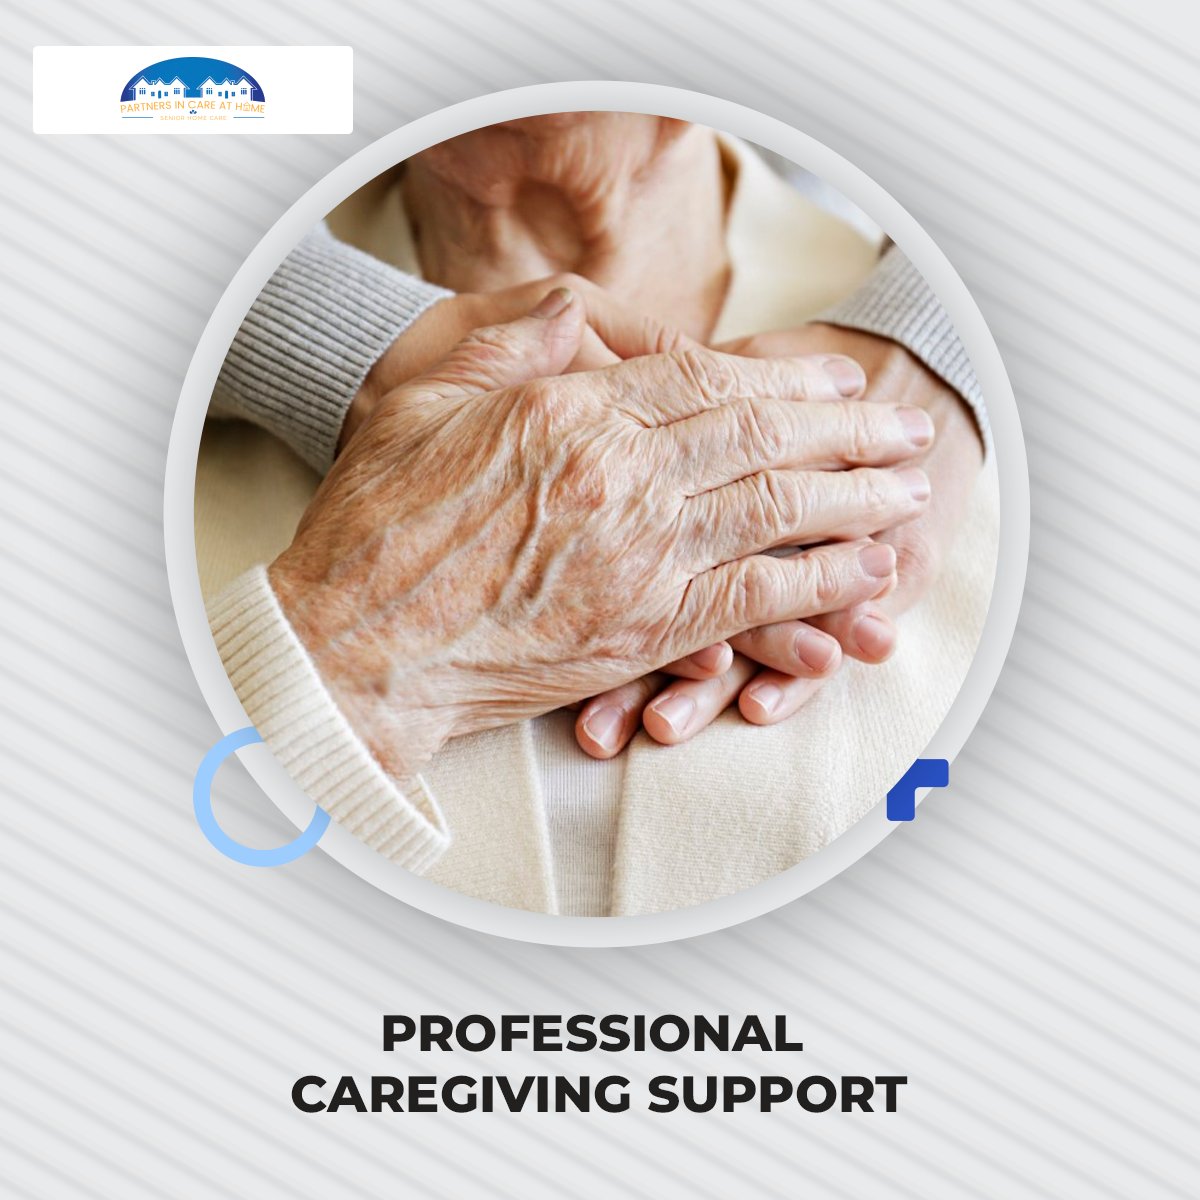 🏠🤝 Providing compassionate care when it matters most, Partners In Care At Home, LLC is your trusted source for professional caregiving support. Our dedicated team understands that #ProfessionalCaregivers #CompassionateSupport #ElderlyCare #QualityOfLife #PartnersInCare